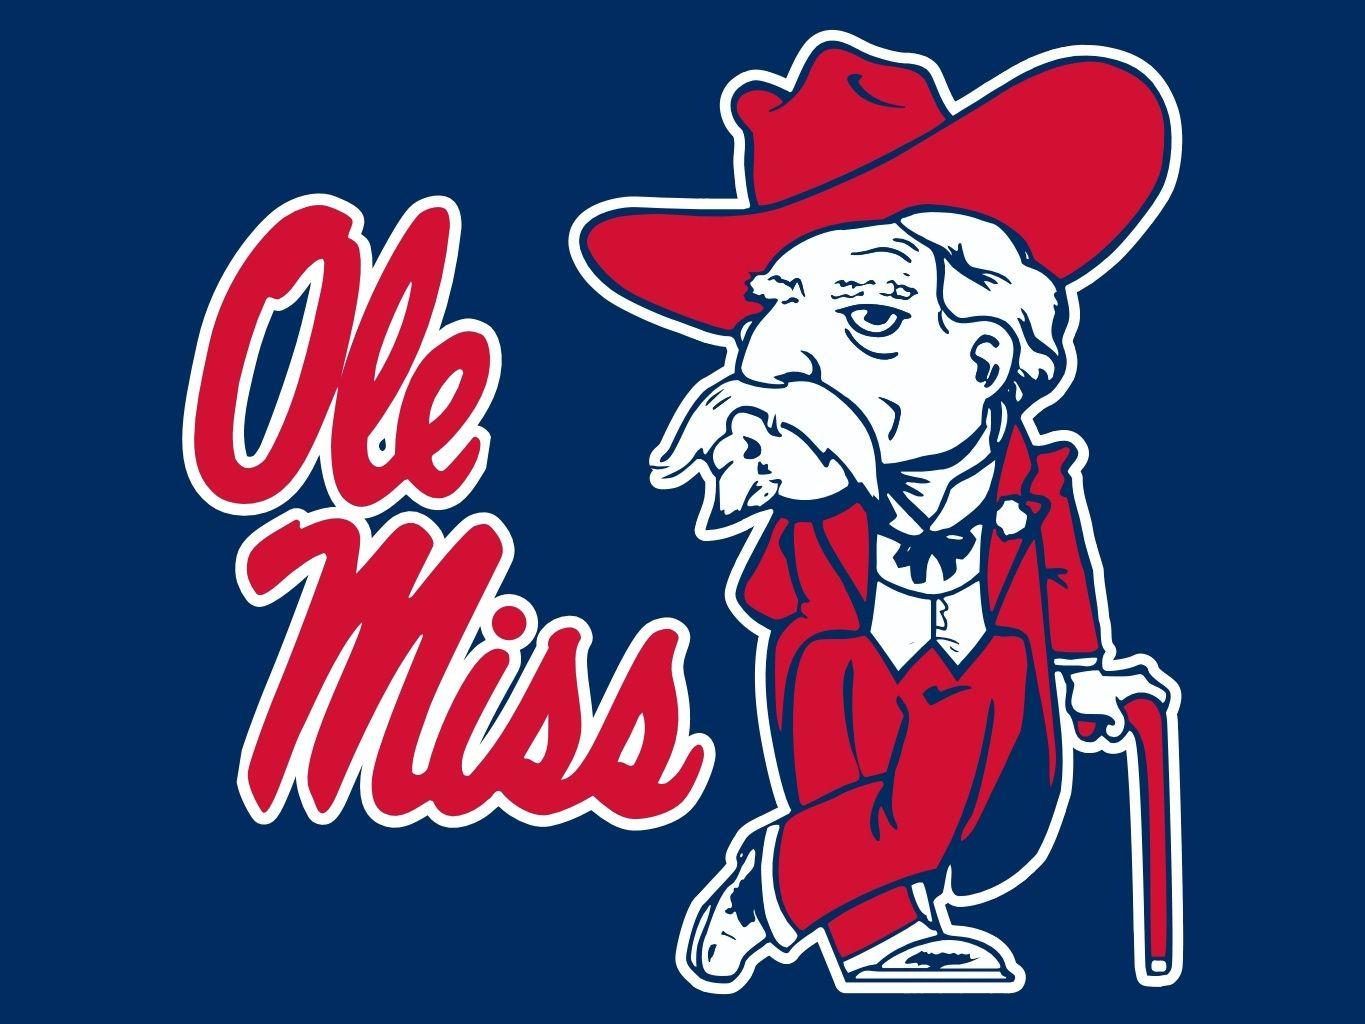 Ole Miss Rebels Football Wallpapers Wallpaper Cave